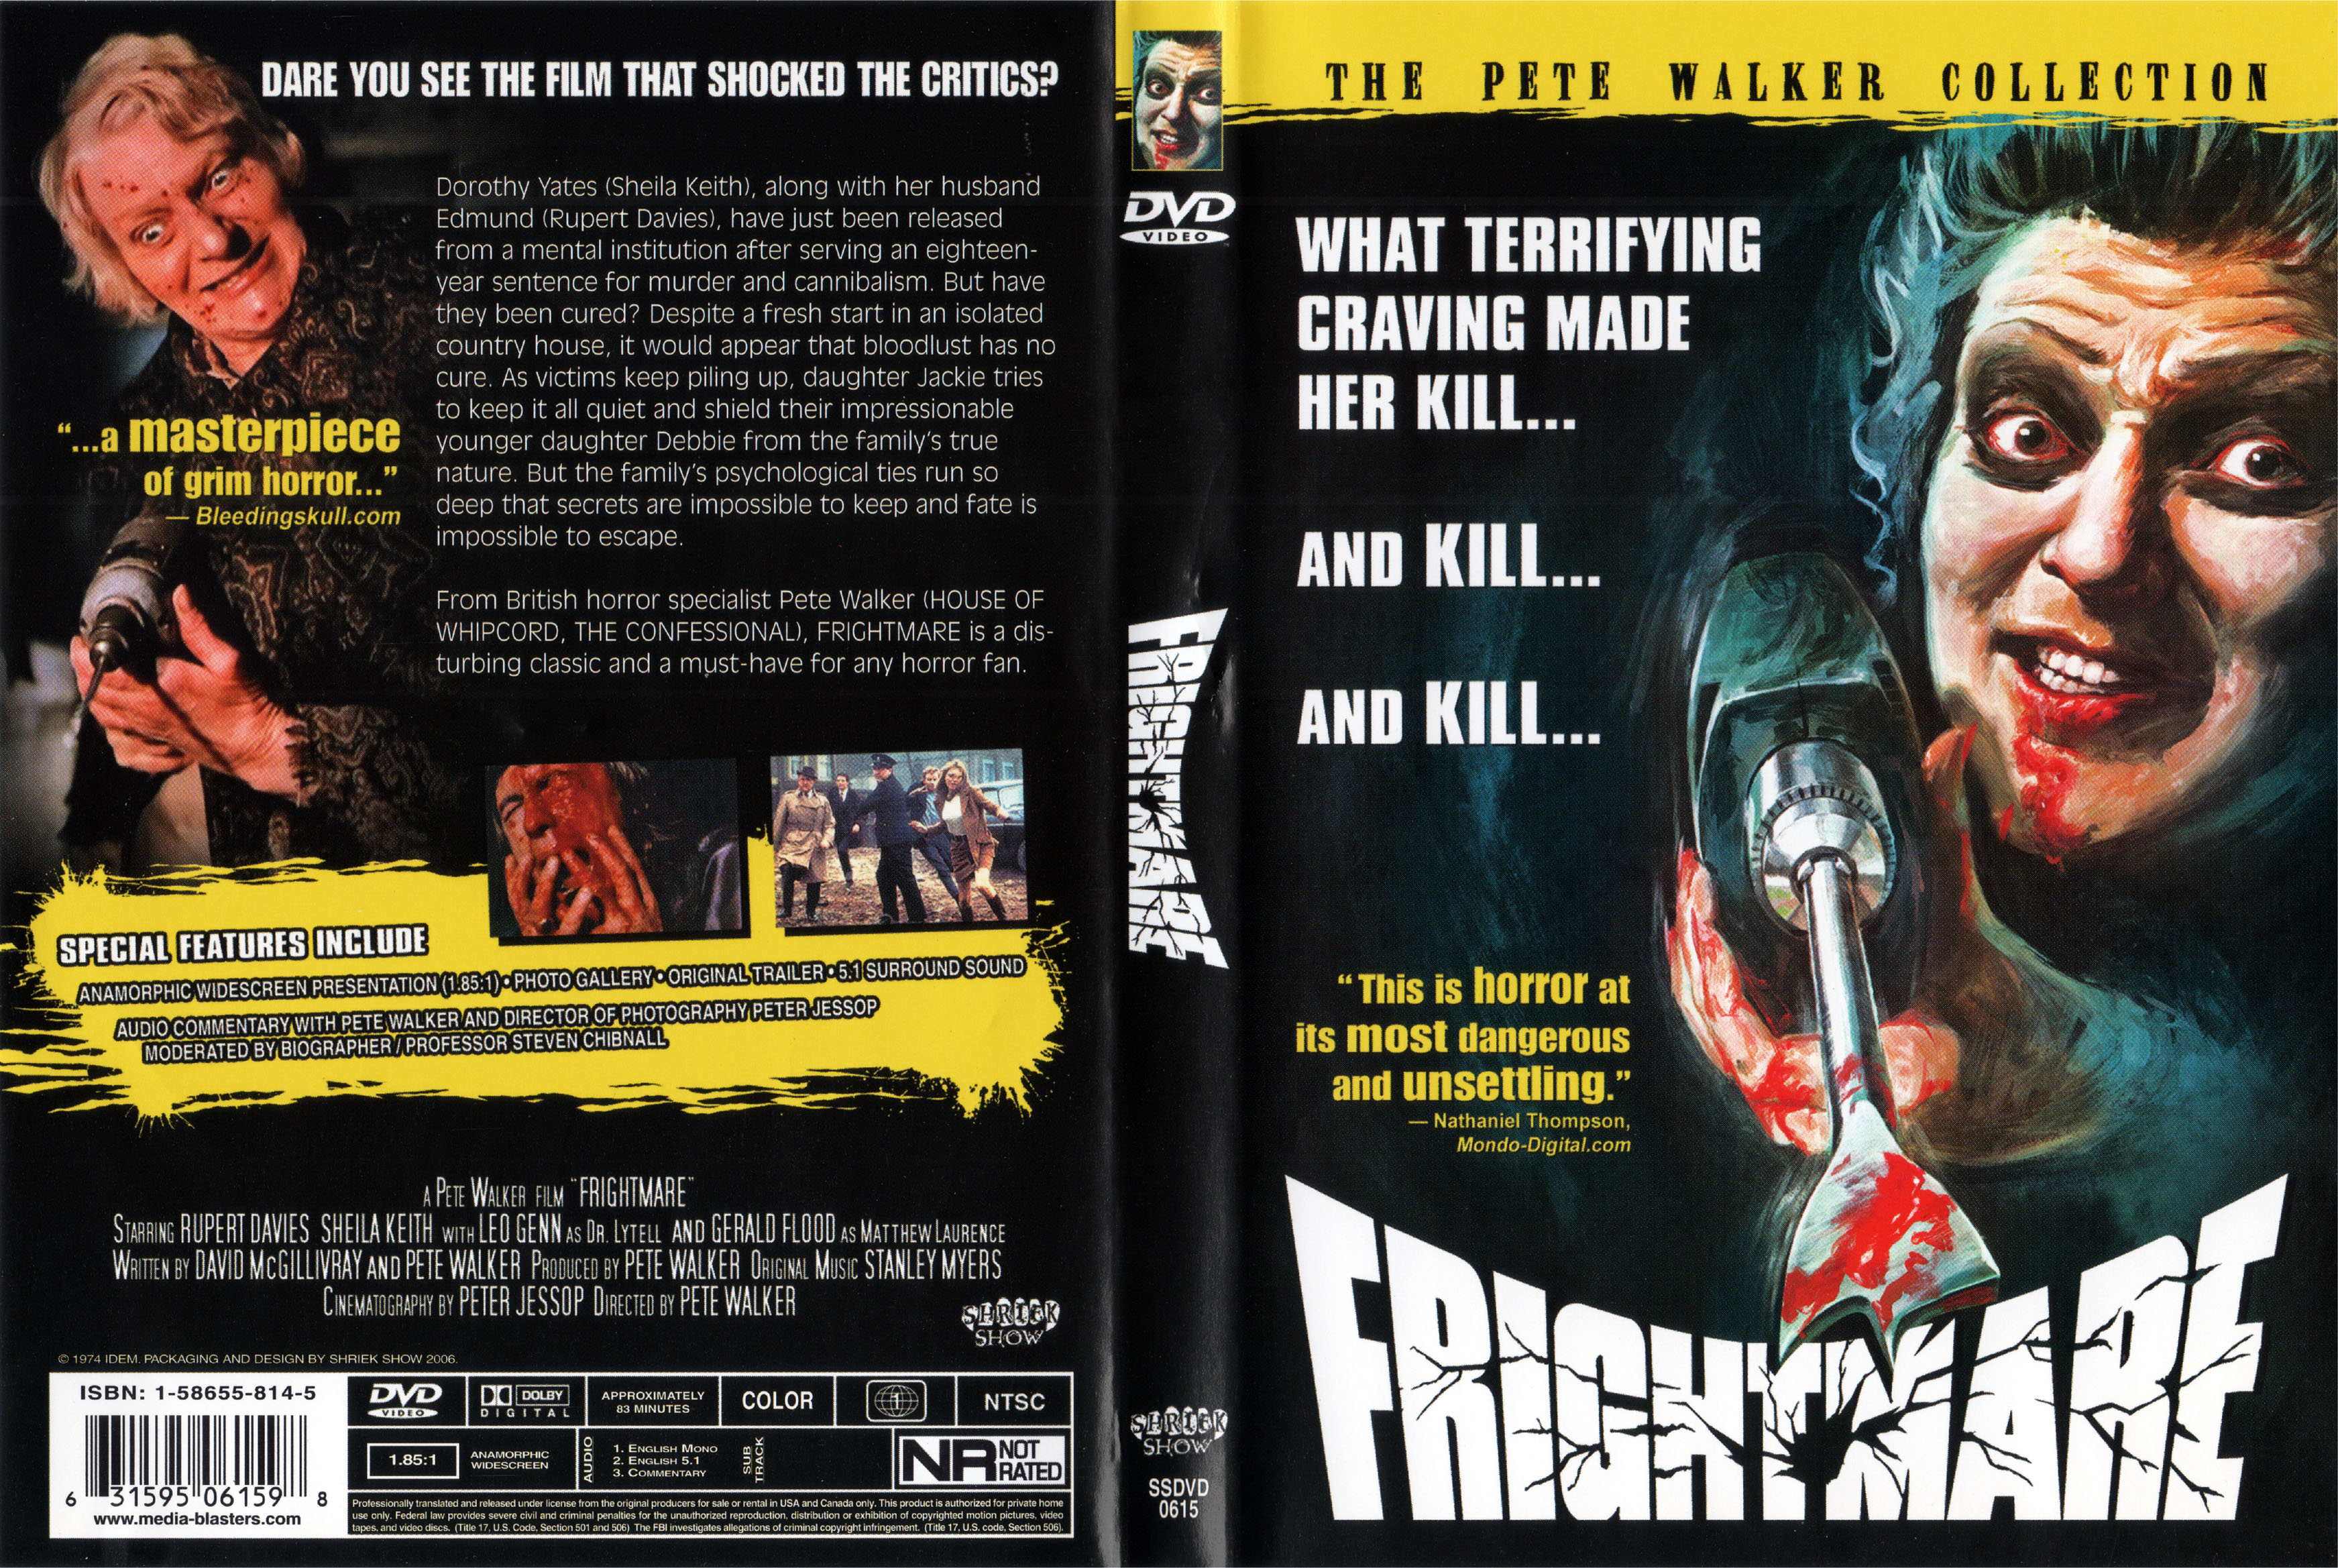 Jaquette DVD Frightmare Zone 1